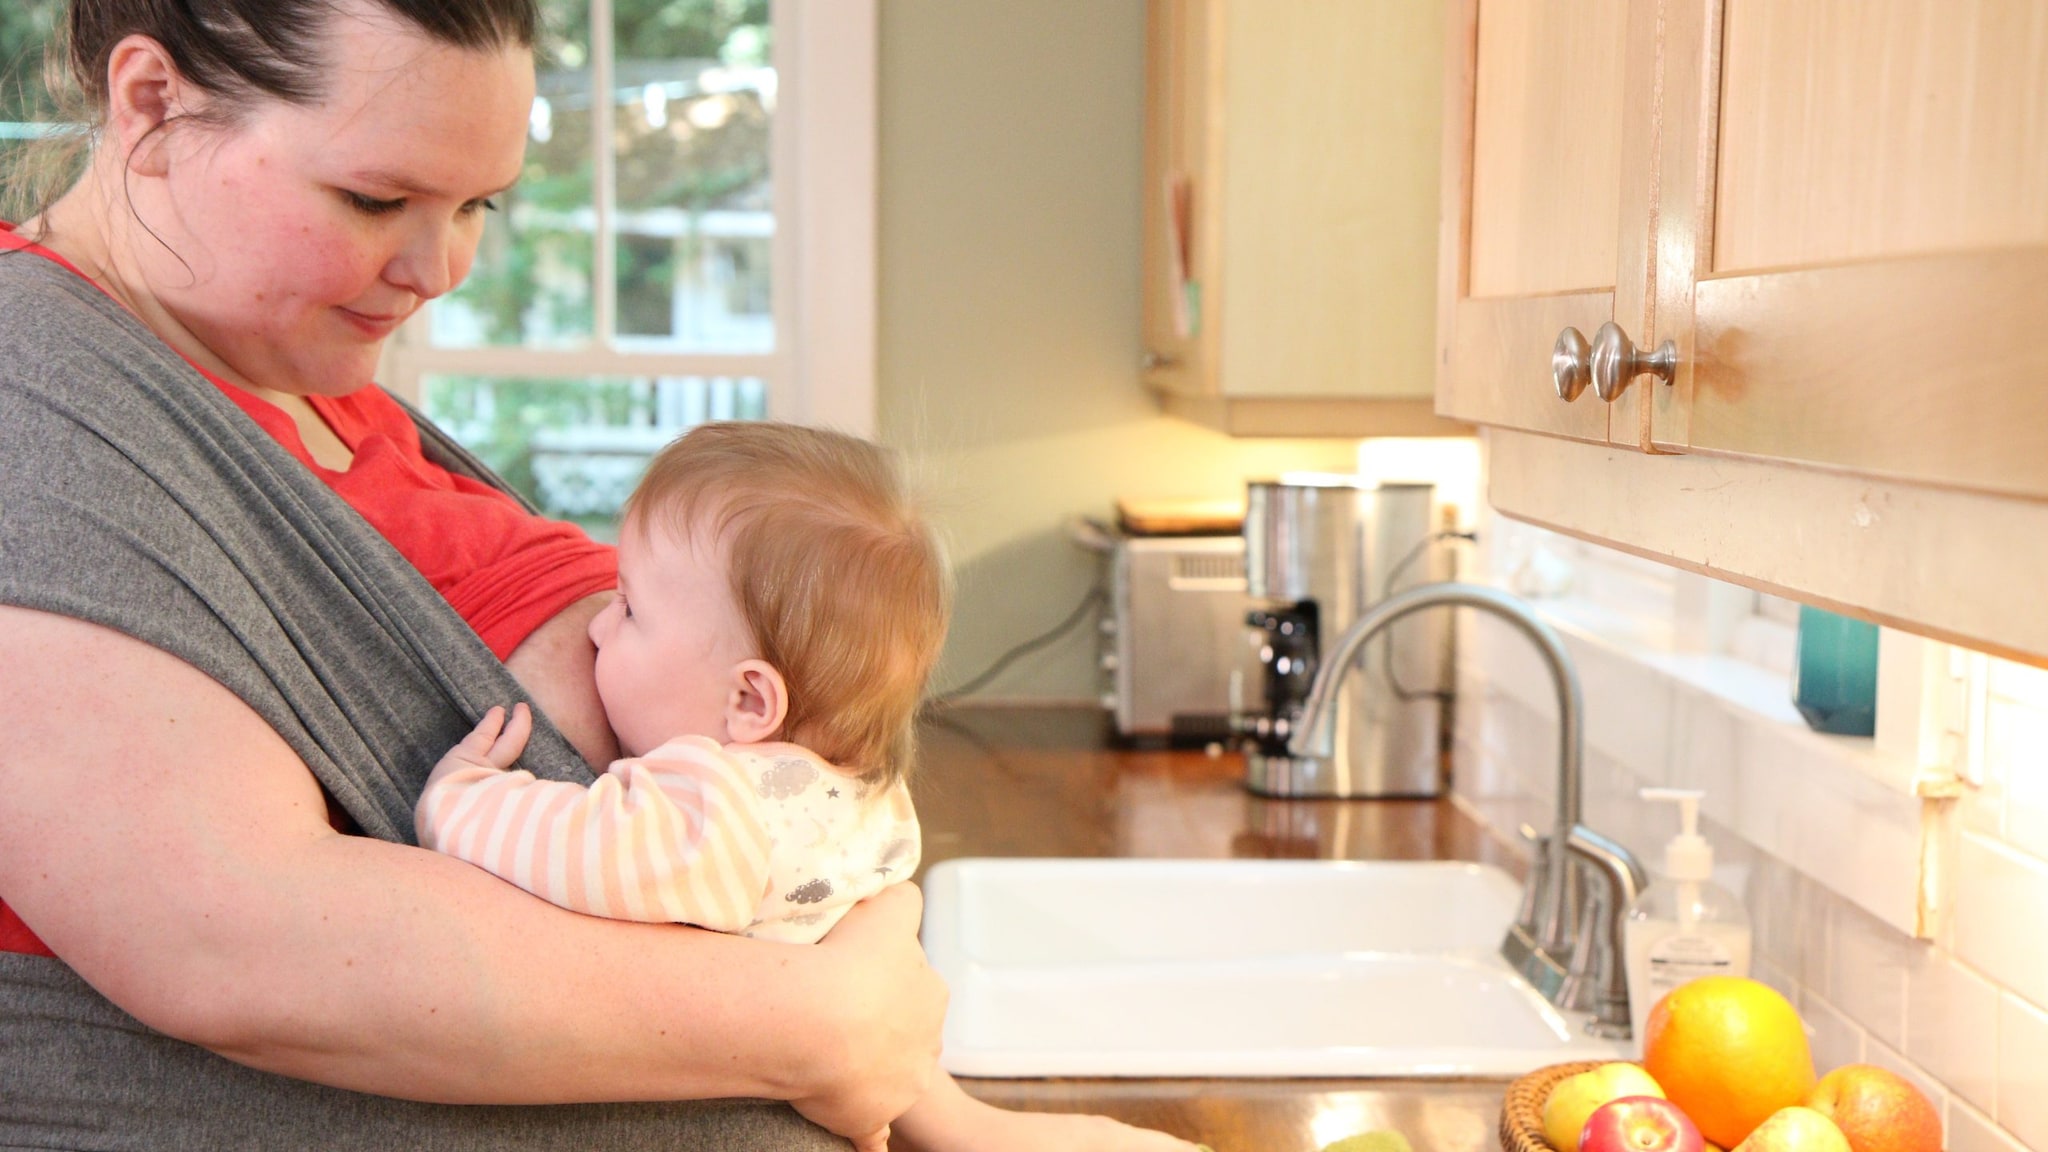 Woman breastfeeds while standing at the kitchen counter.